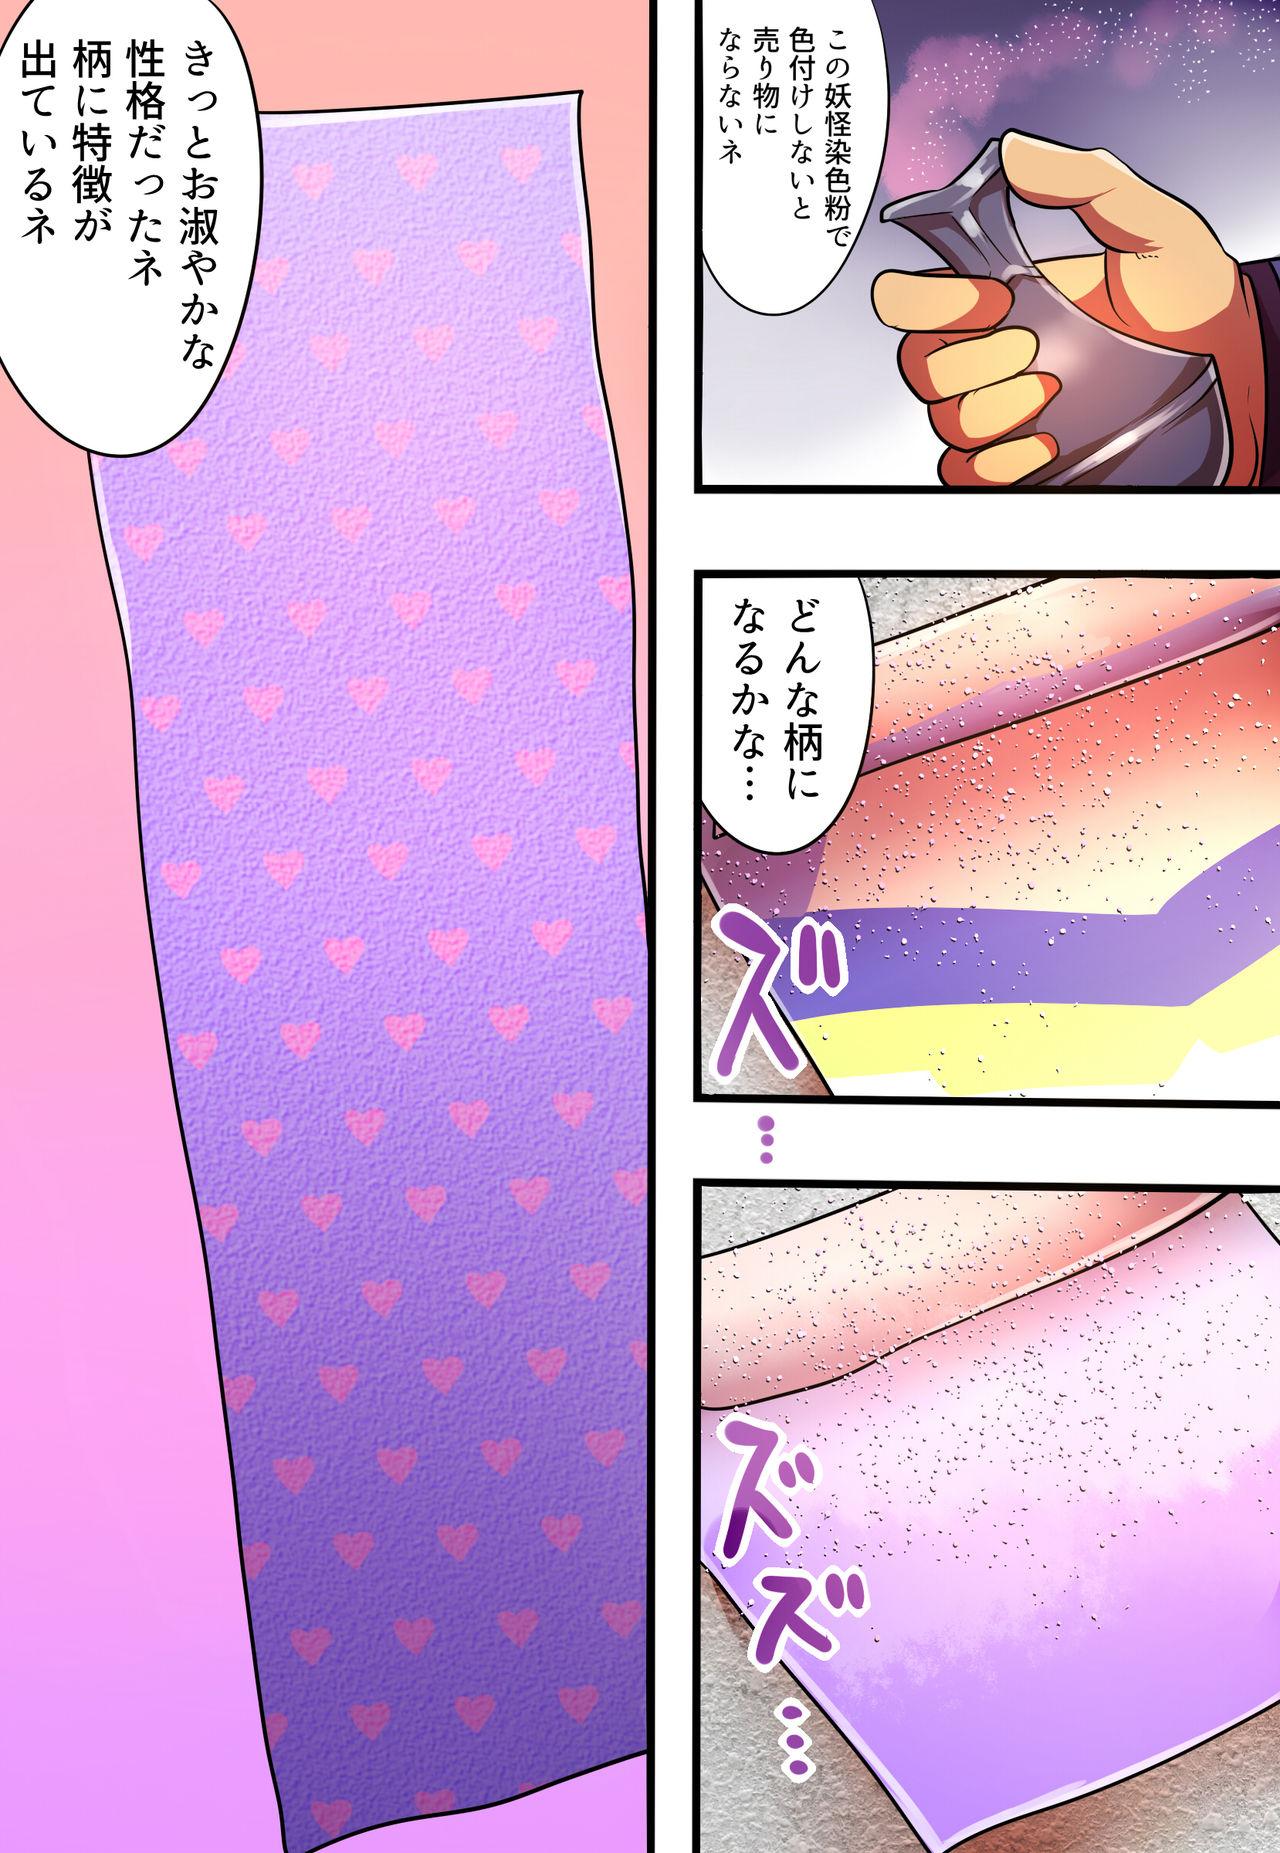 Fuck For Cash shinenkan Comic of Textile-ification ghost storys 18 Porn - Page 4